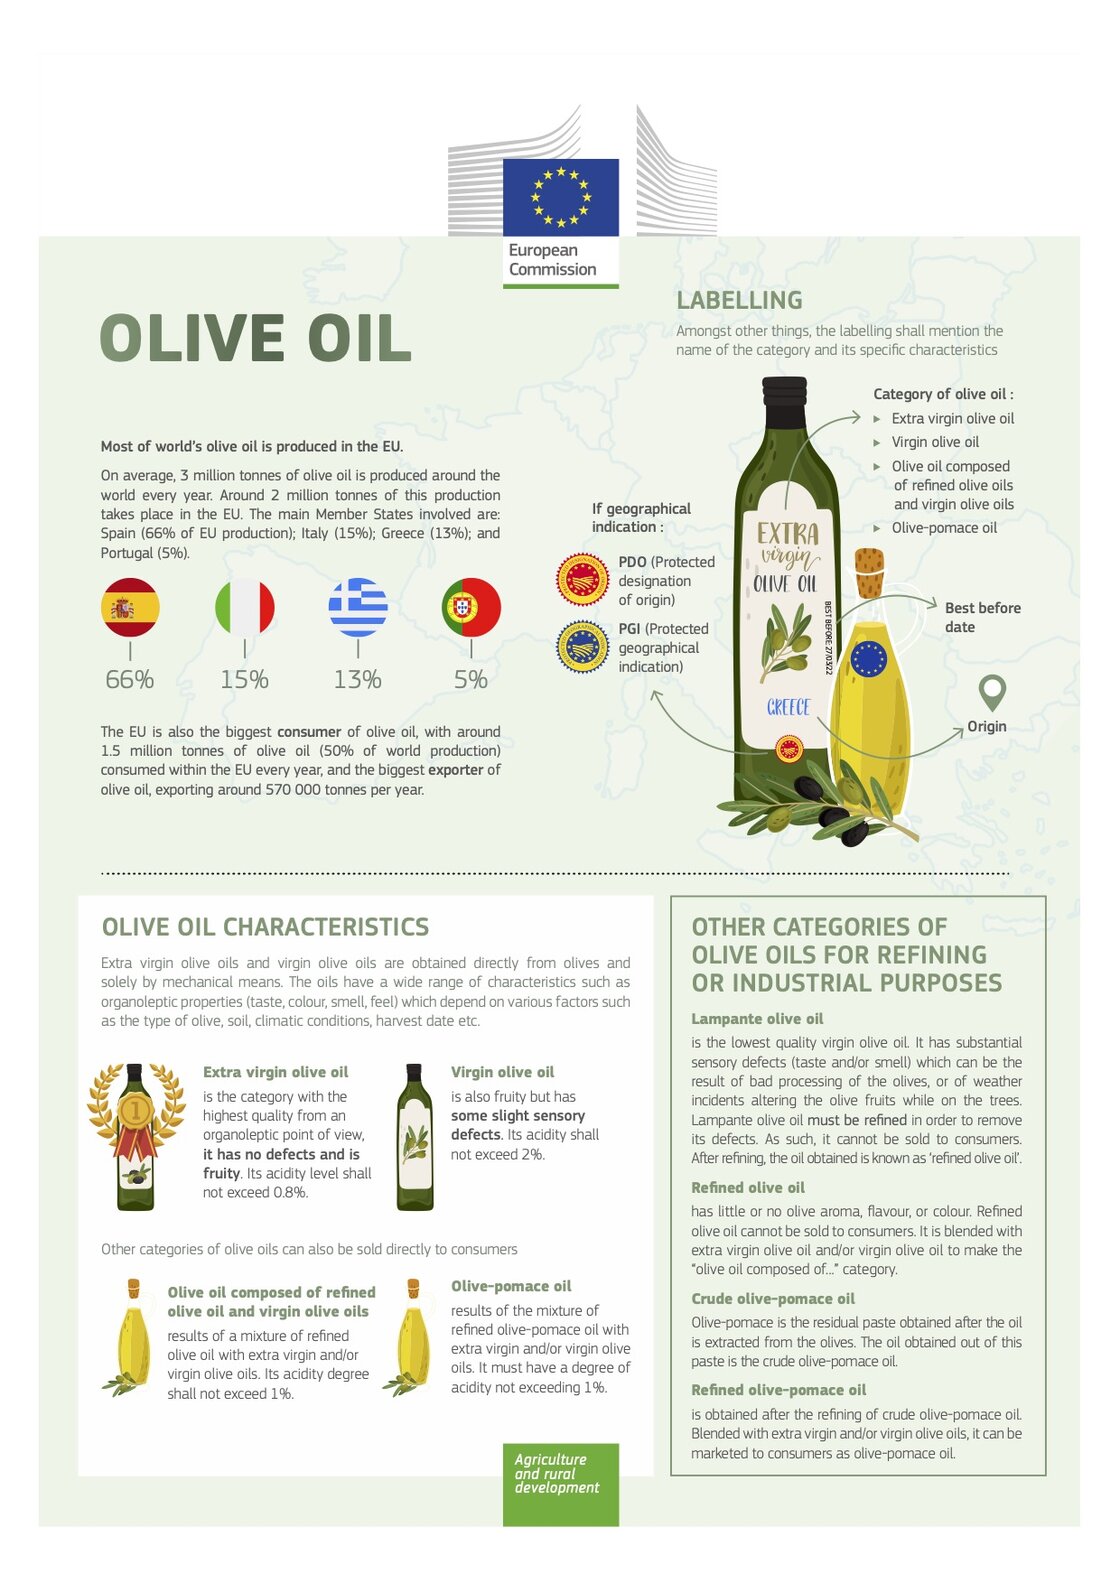 https://ec.europa.eu/info/food-farming-fisheries/plants-and-plant-products/plant-products/olive-oil_sk